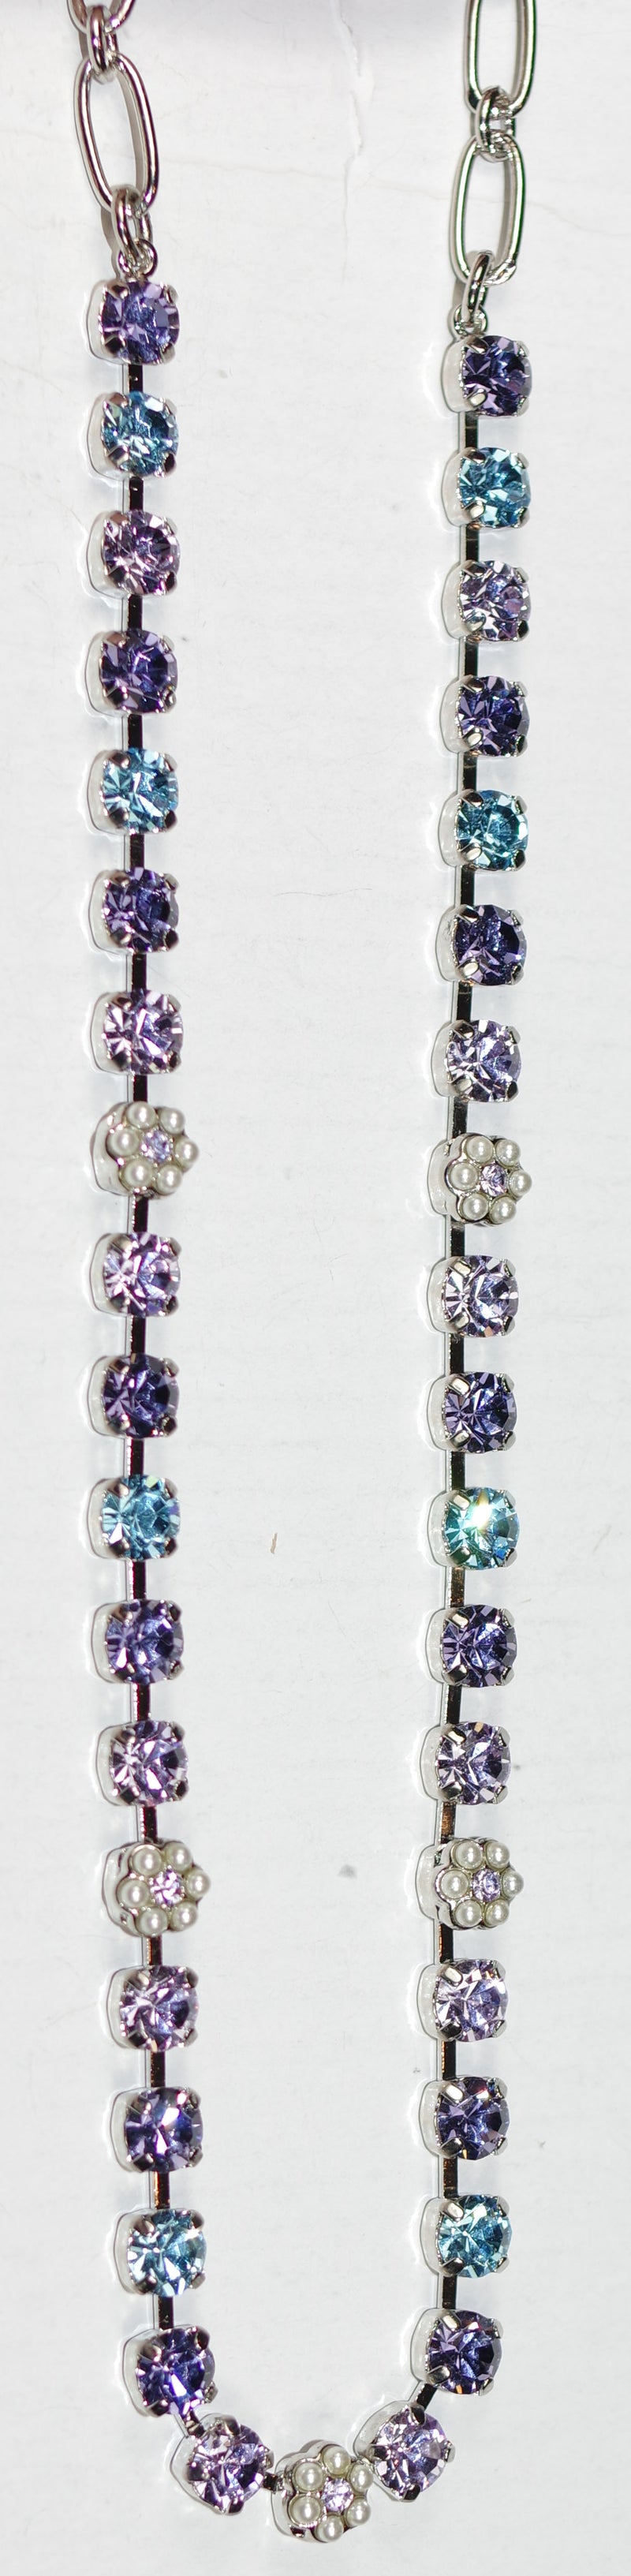 MARIANA NECKLACE BLUE MOON: purple, blue, pearl 1/4" stones in silver rhodium setting, 18" adjustable chain